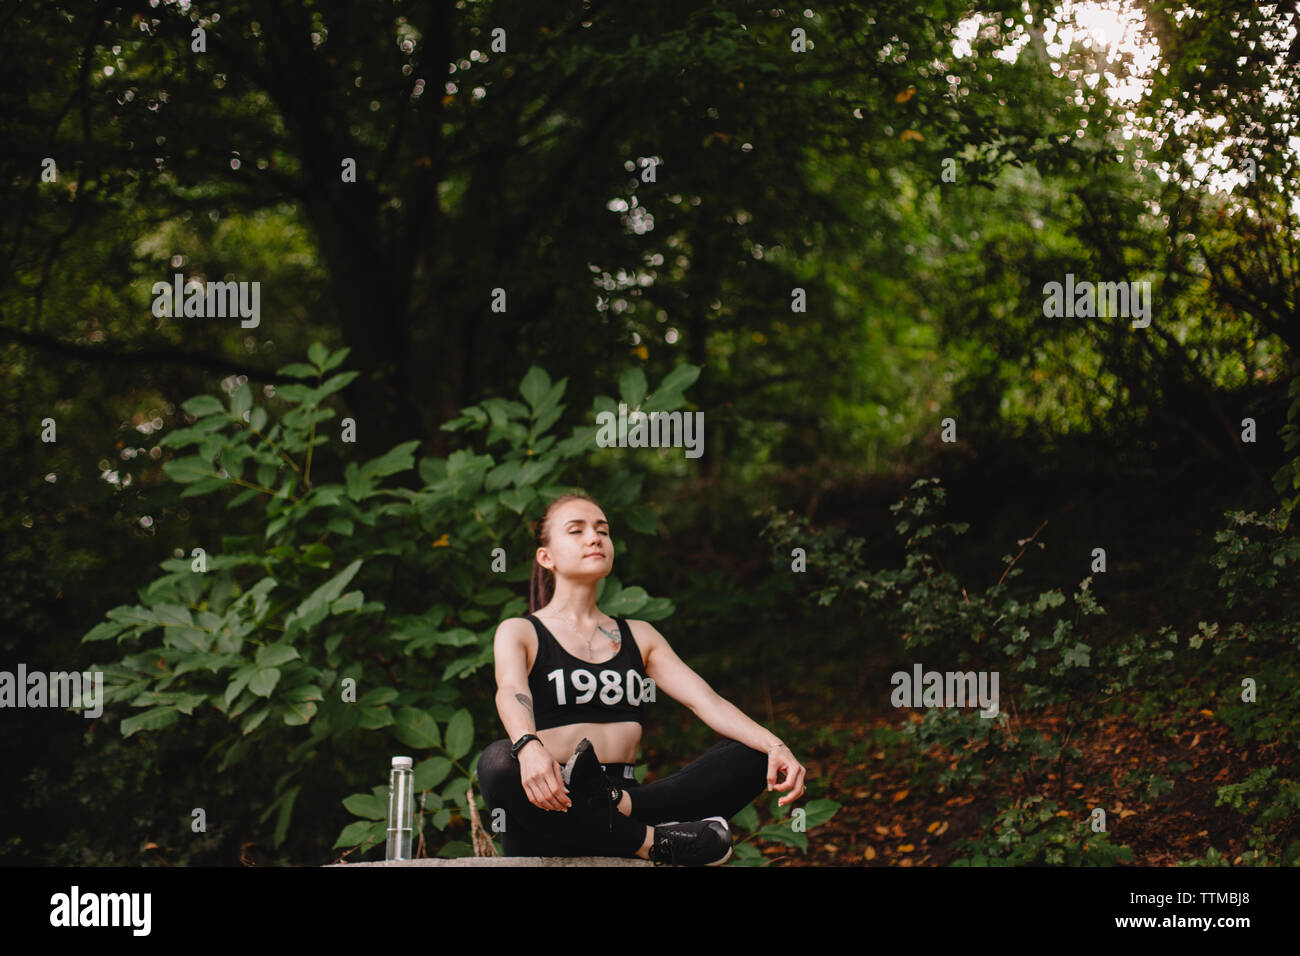 Woman practicing yoga in park against trees Stock Photo